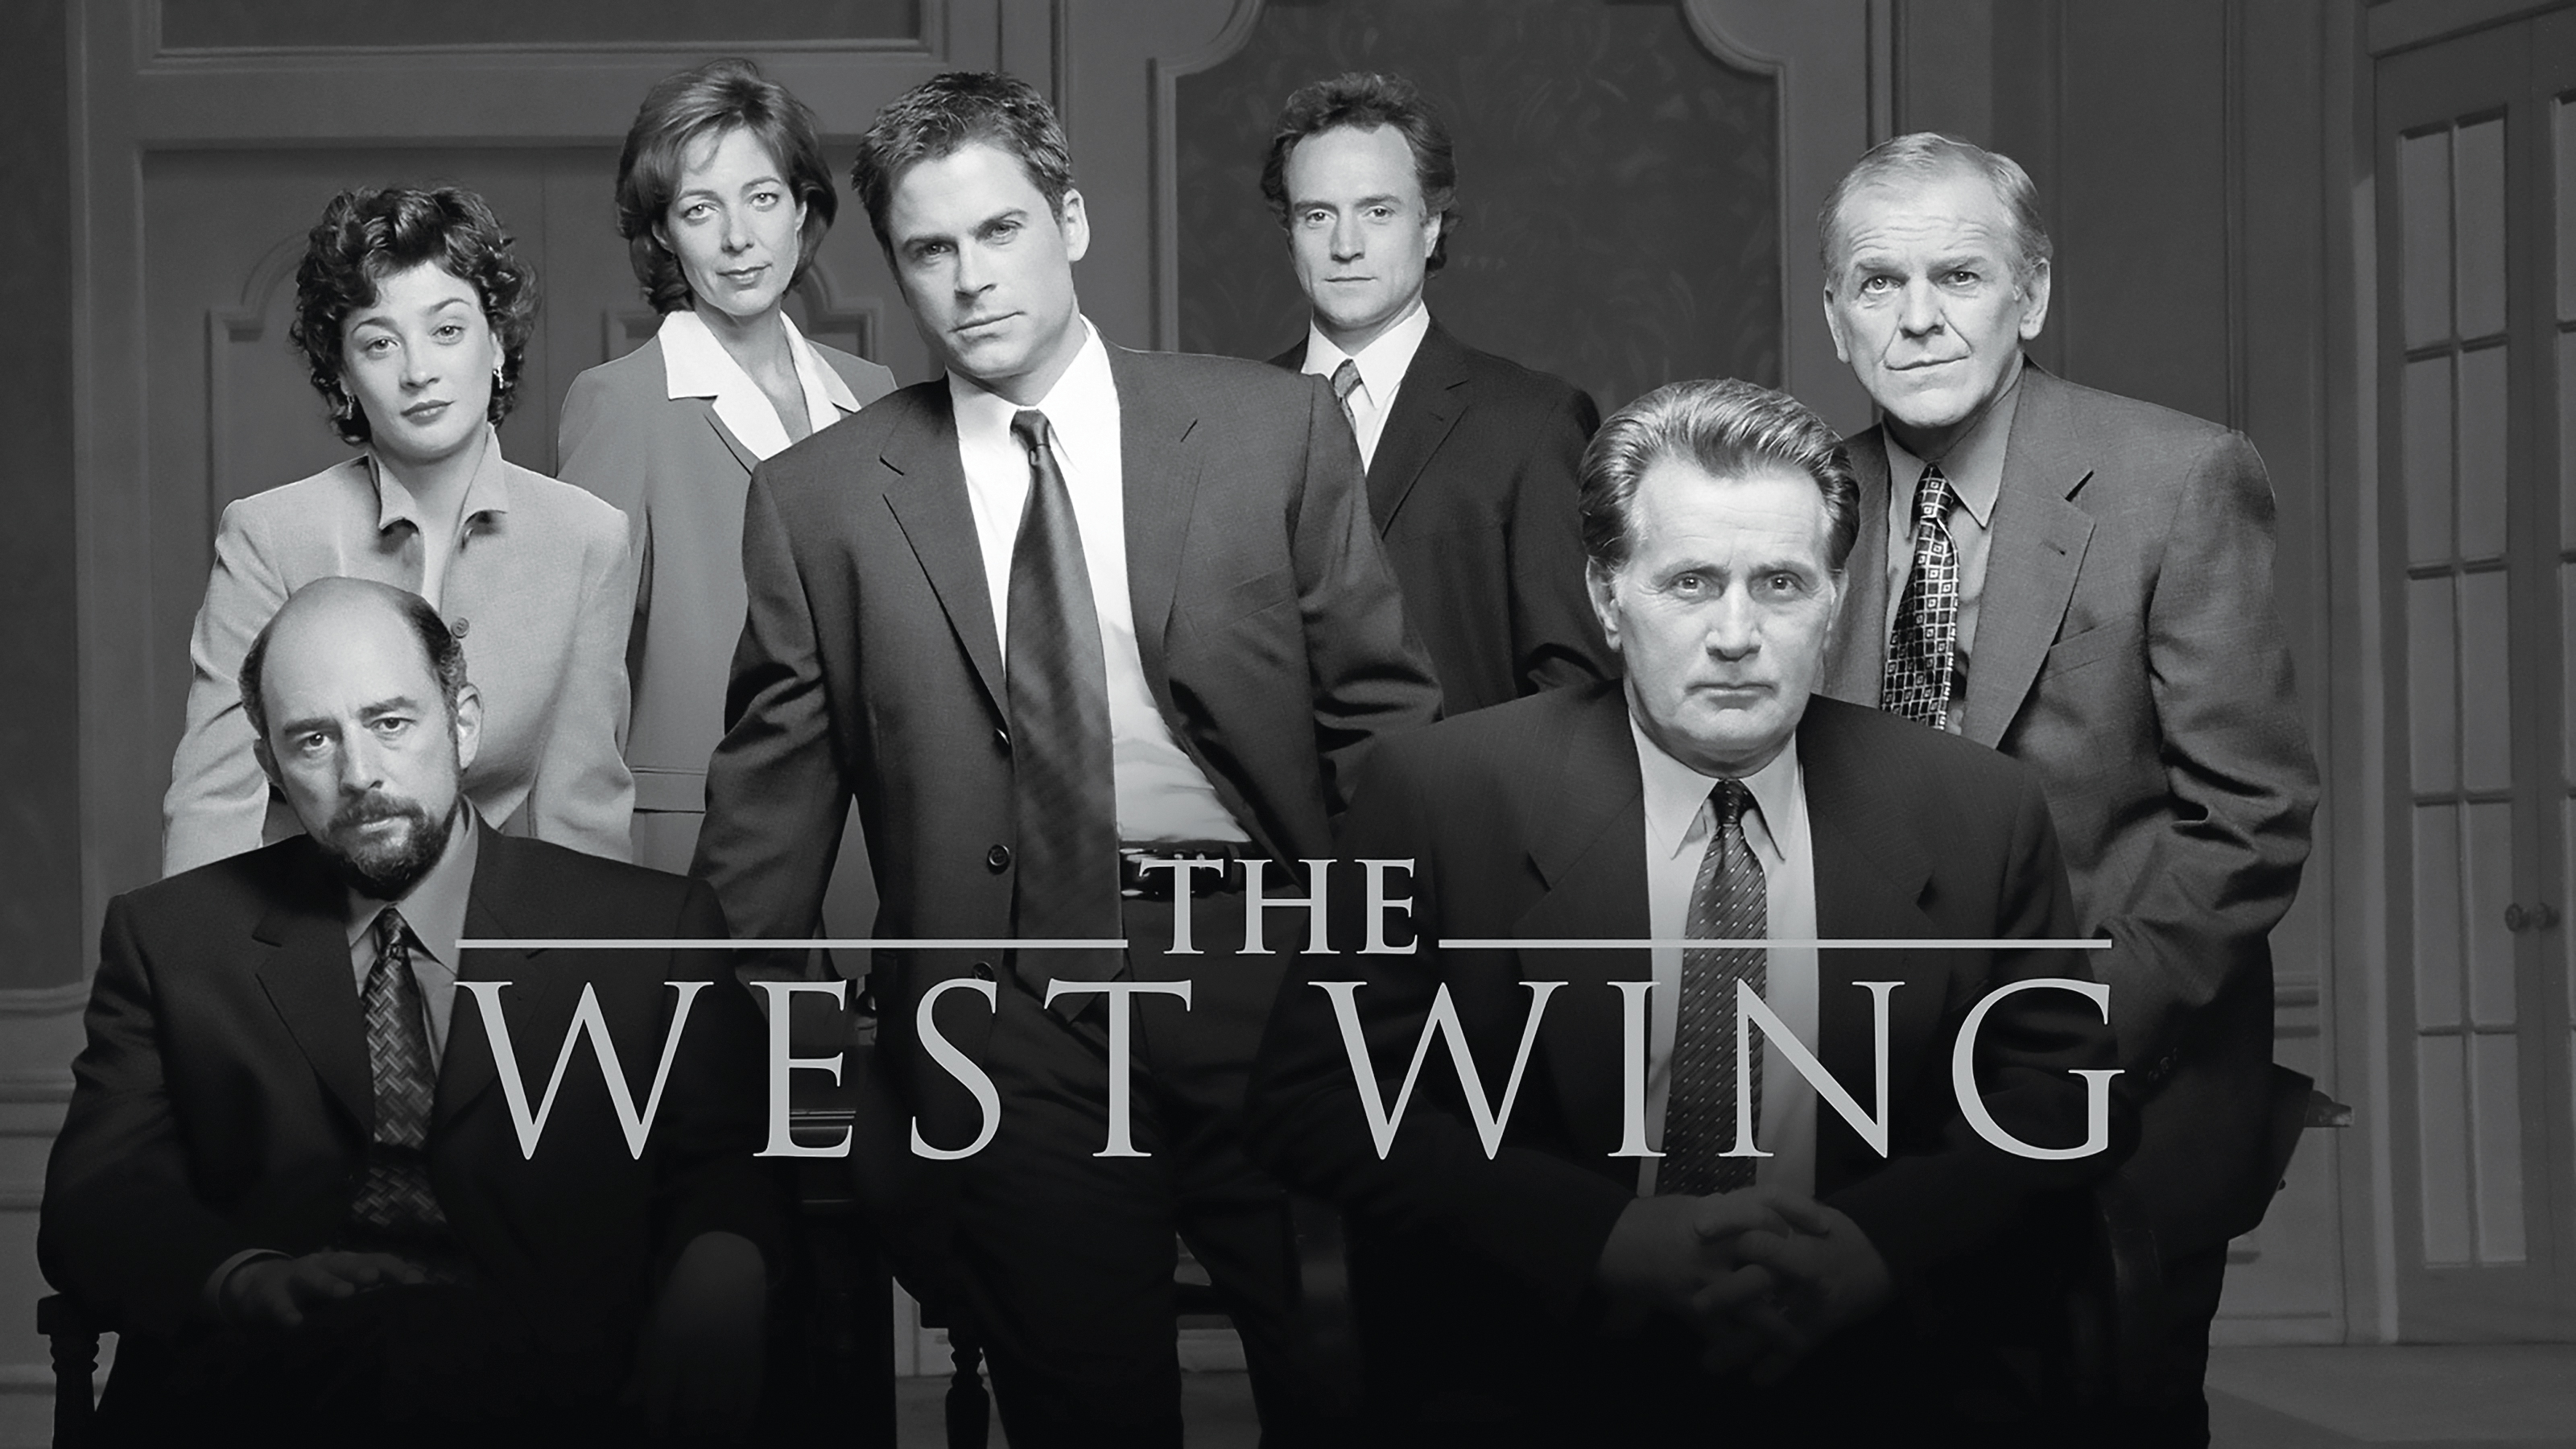 Why “The West Wing” Matters